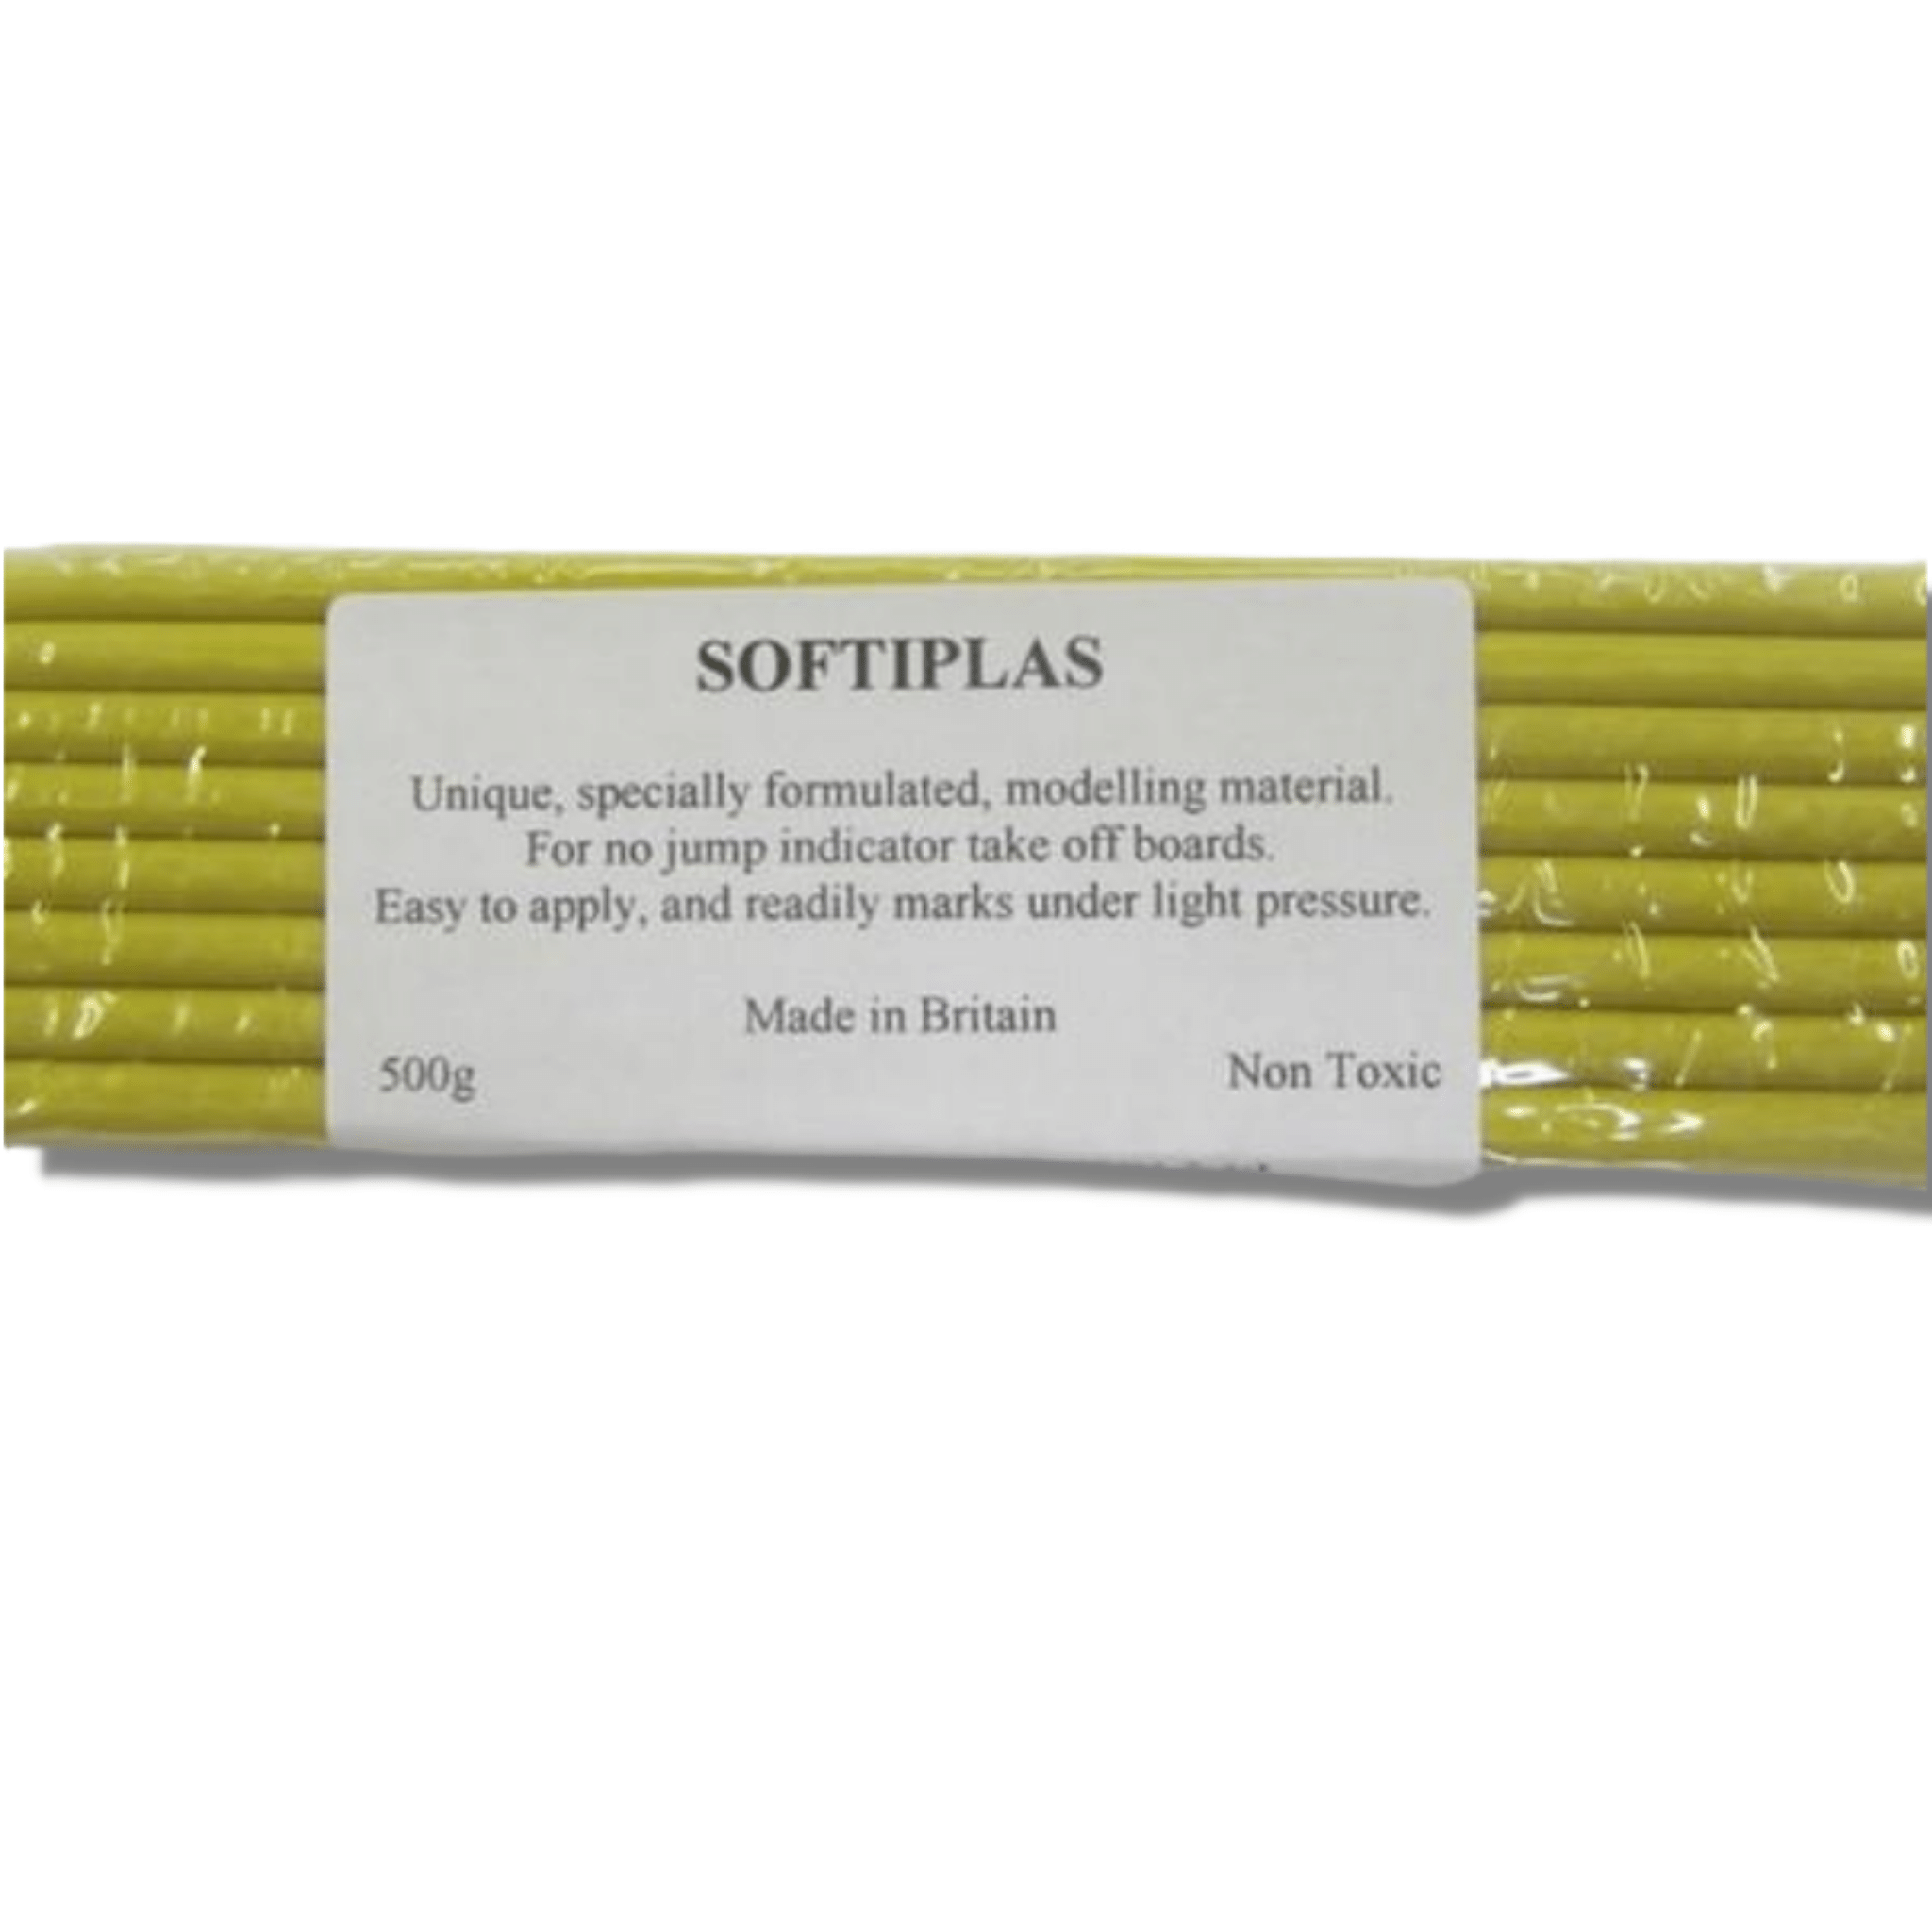 Softiplas soft marker material for no-jump indicator boards | Long Jump & Triple Jump | Similar to Plasticine